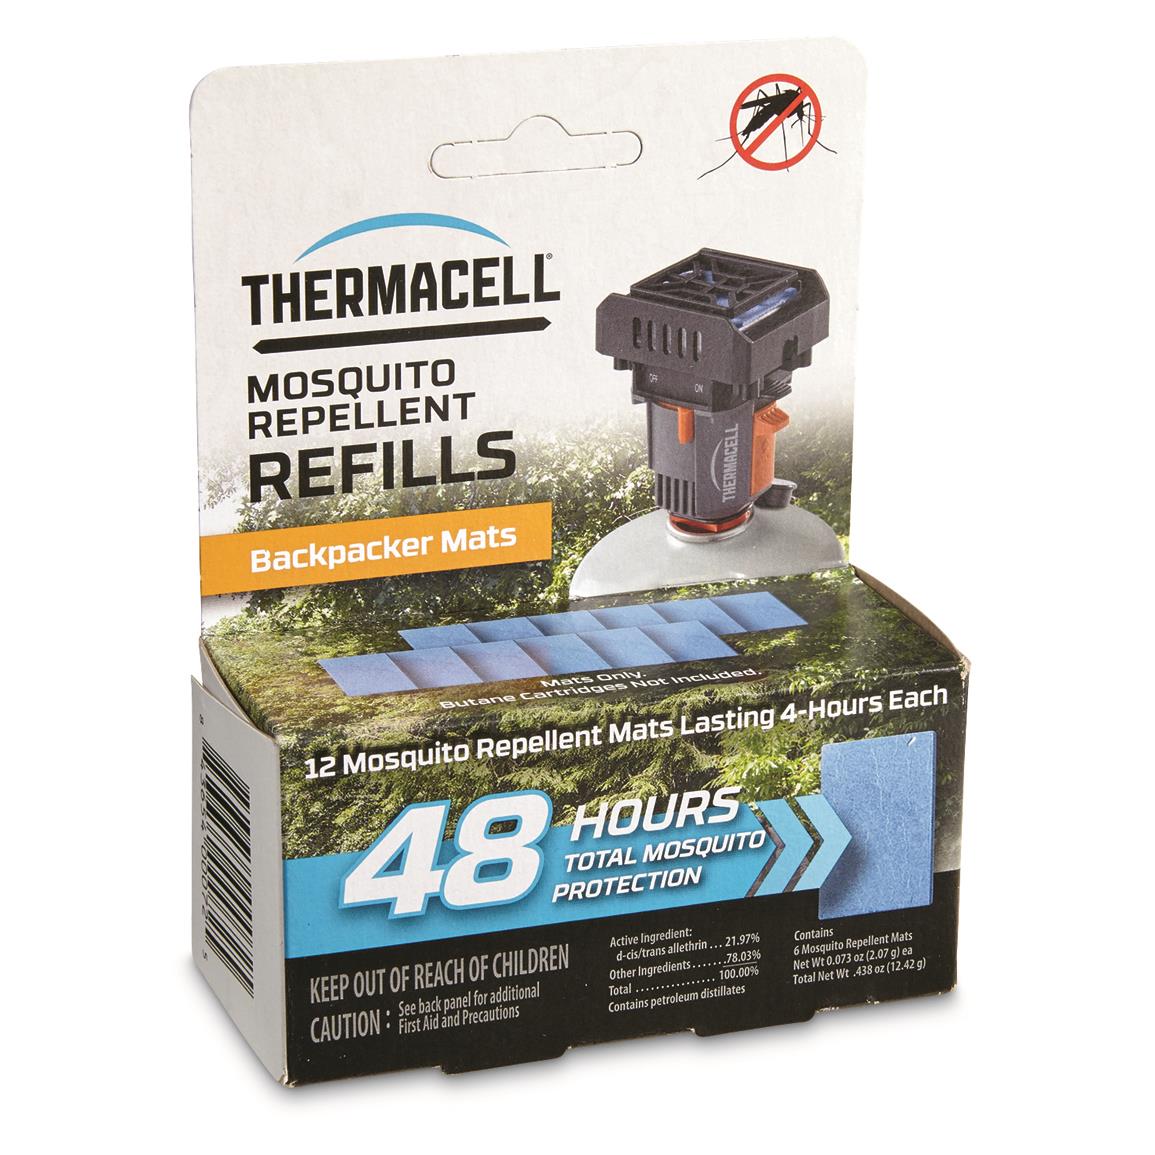 Thermacell® Backpacker Mosquito Repeller Mat Refills